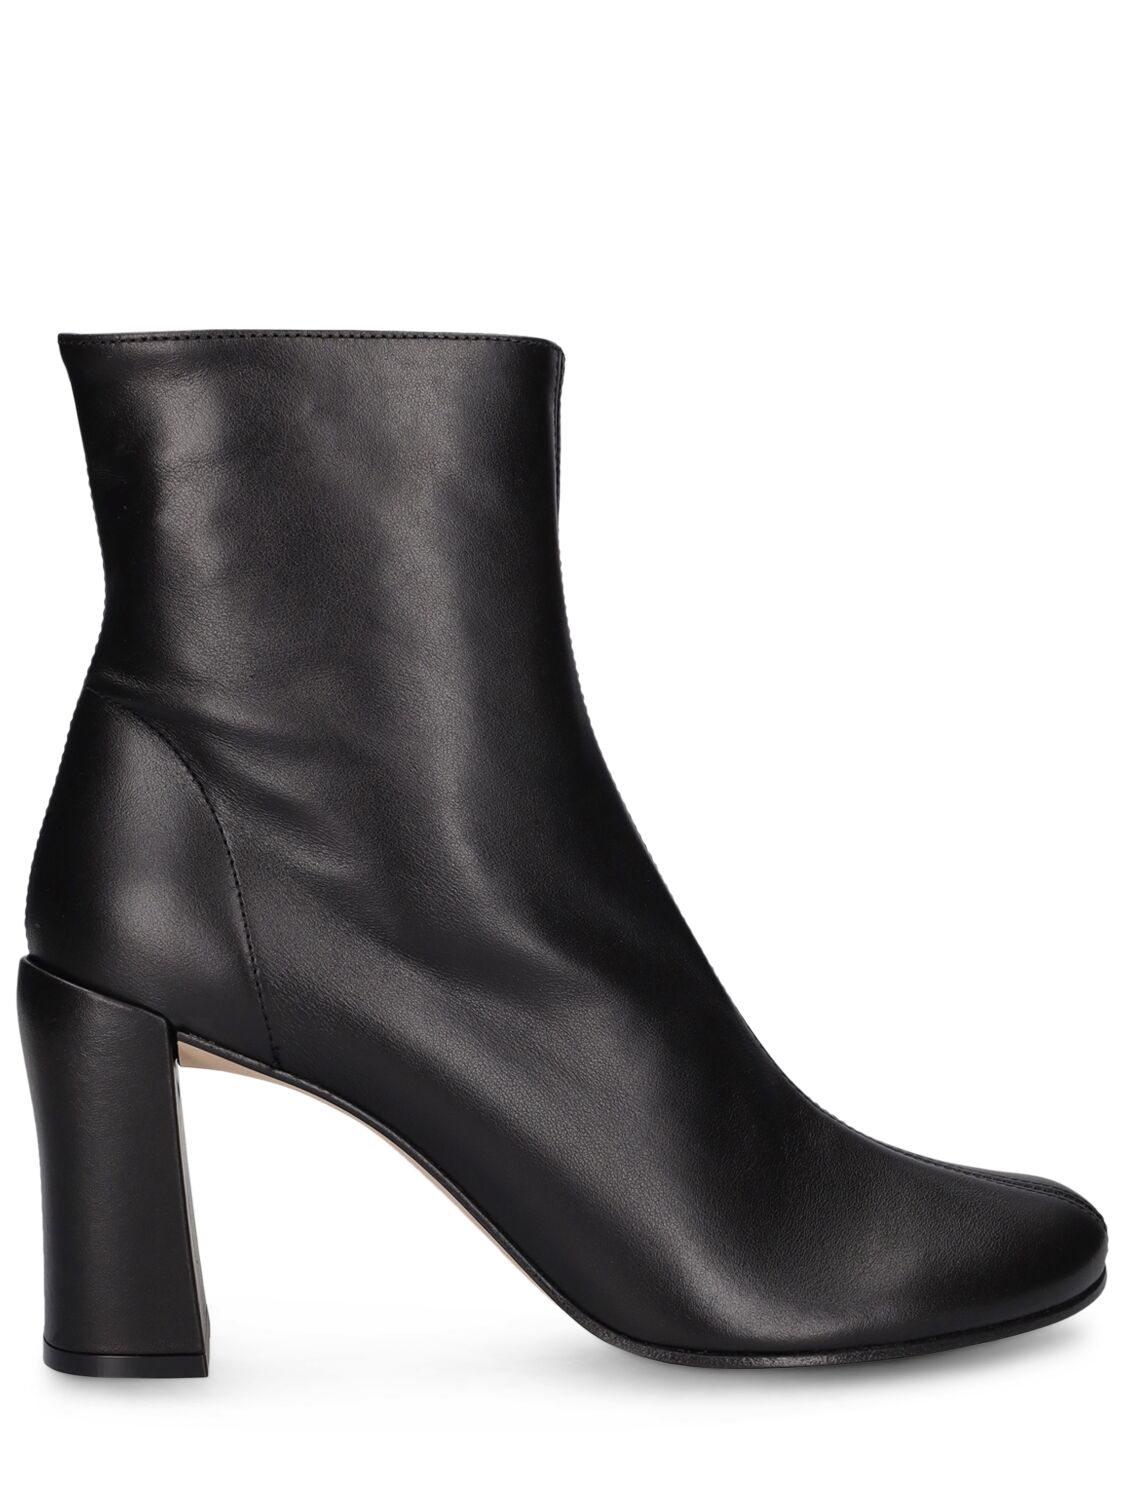 BY FAR 100MM VLADA LEATHER ANKLE BOOTS